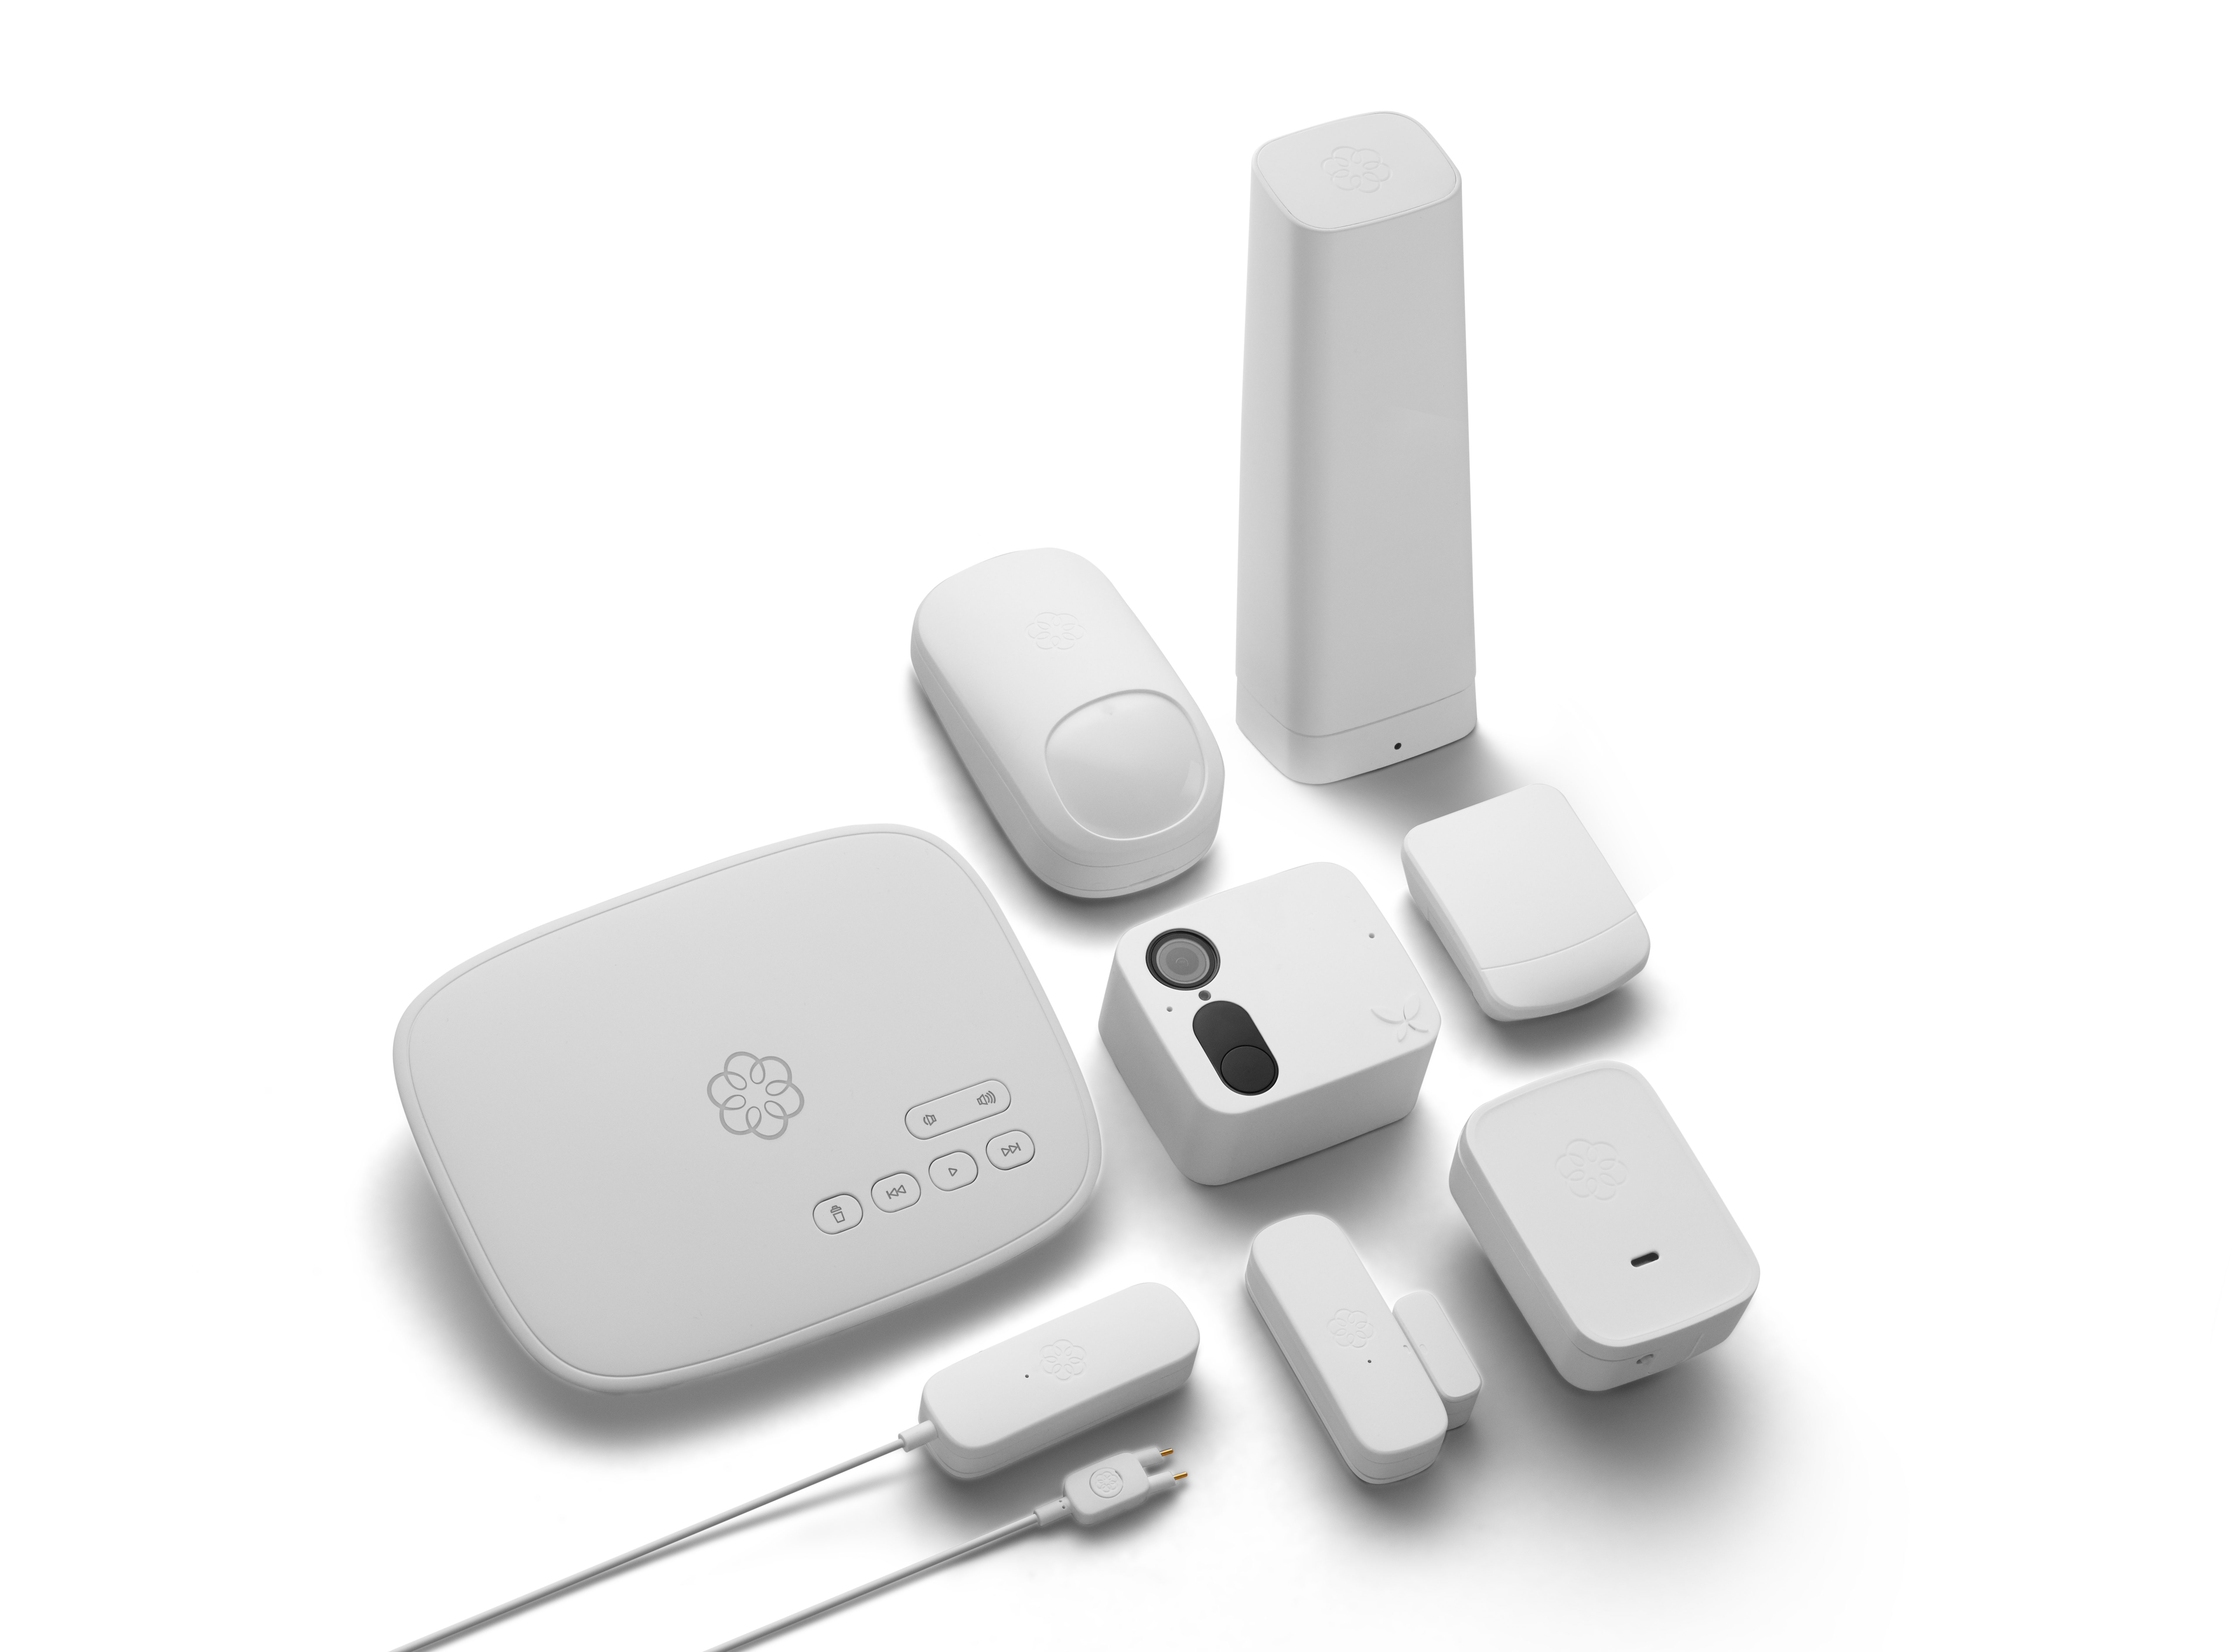 Ooma Smart Security products with Ooma Connect 4G